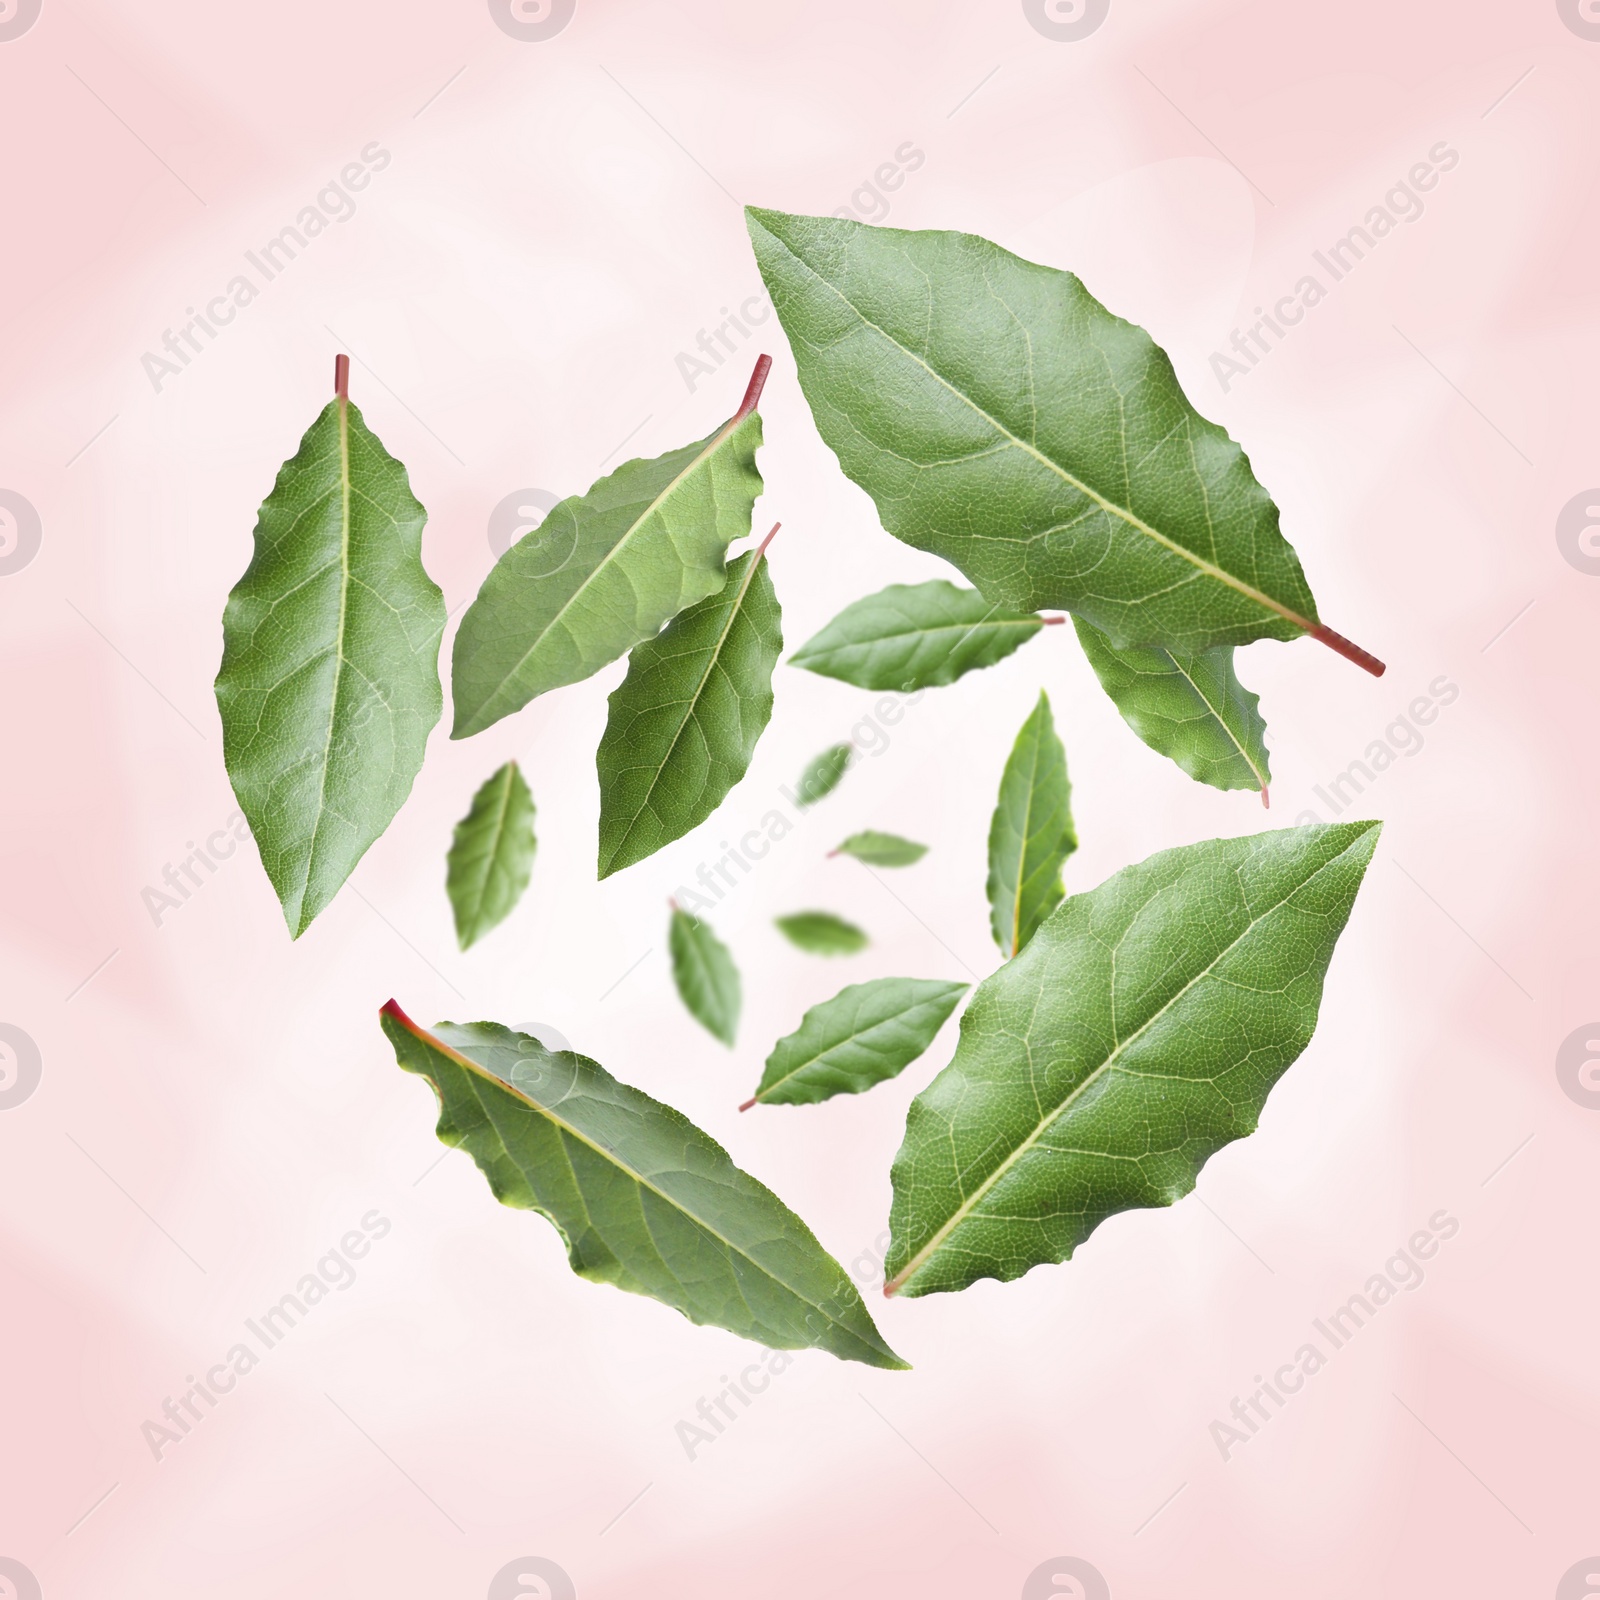 Image of Fresh bay leaves whirling on pink background